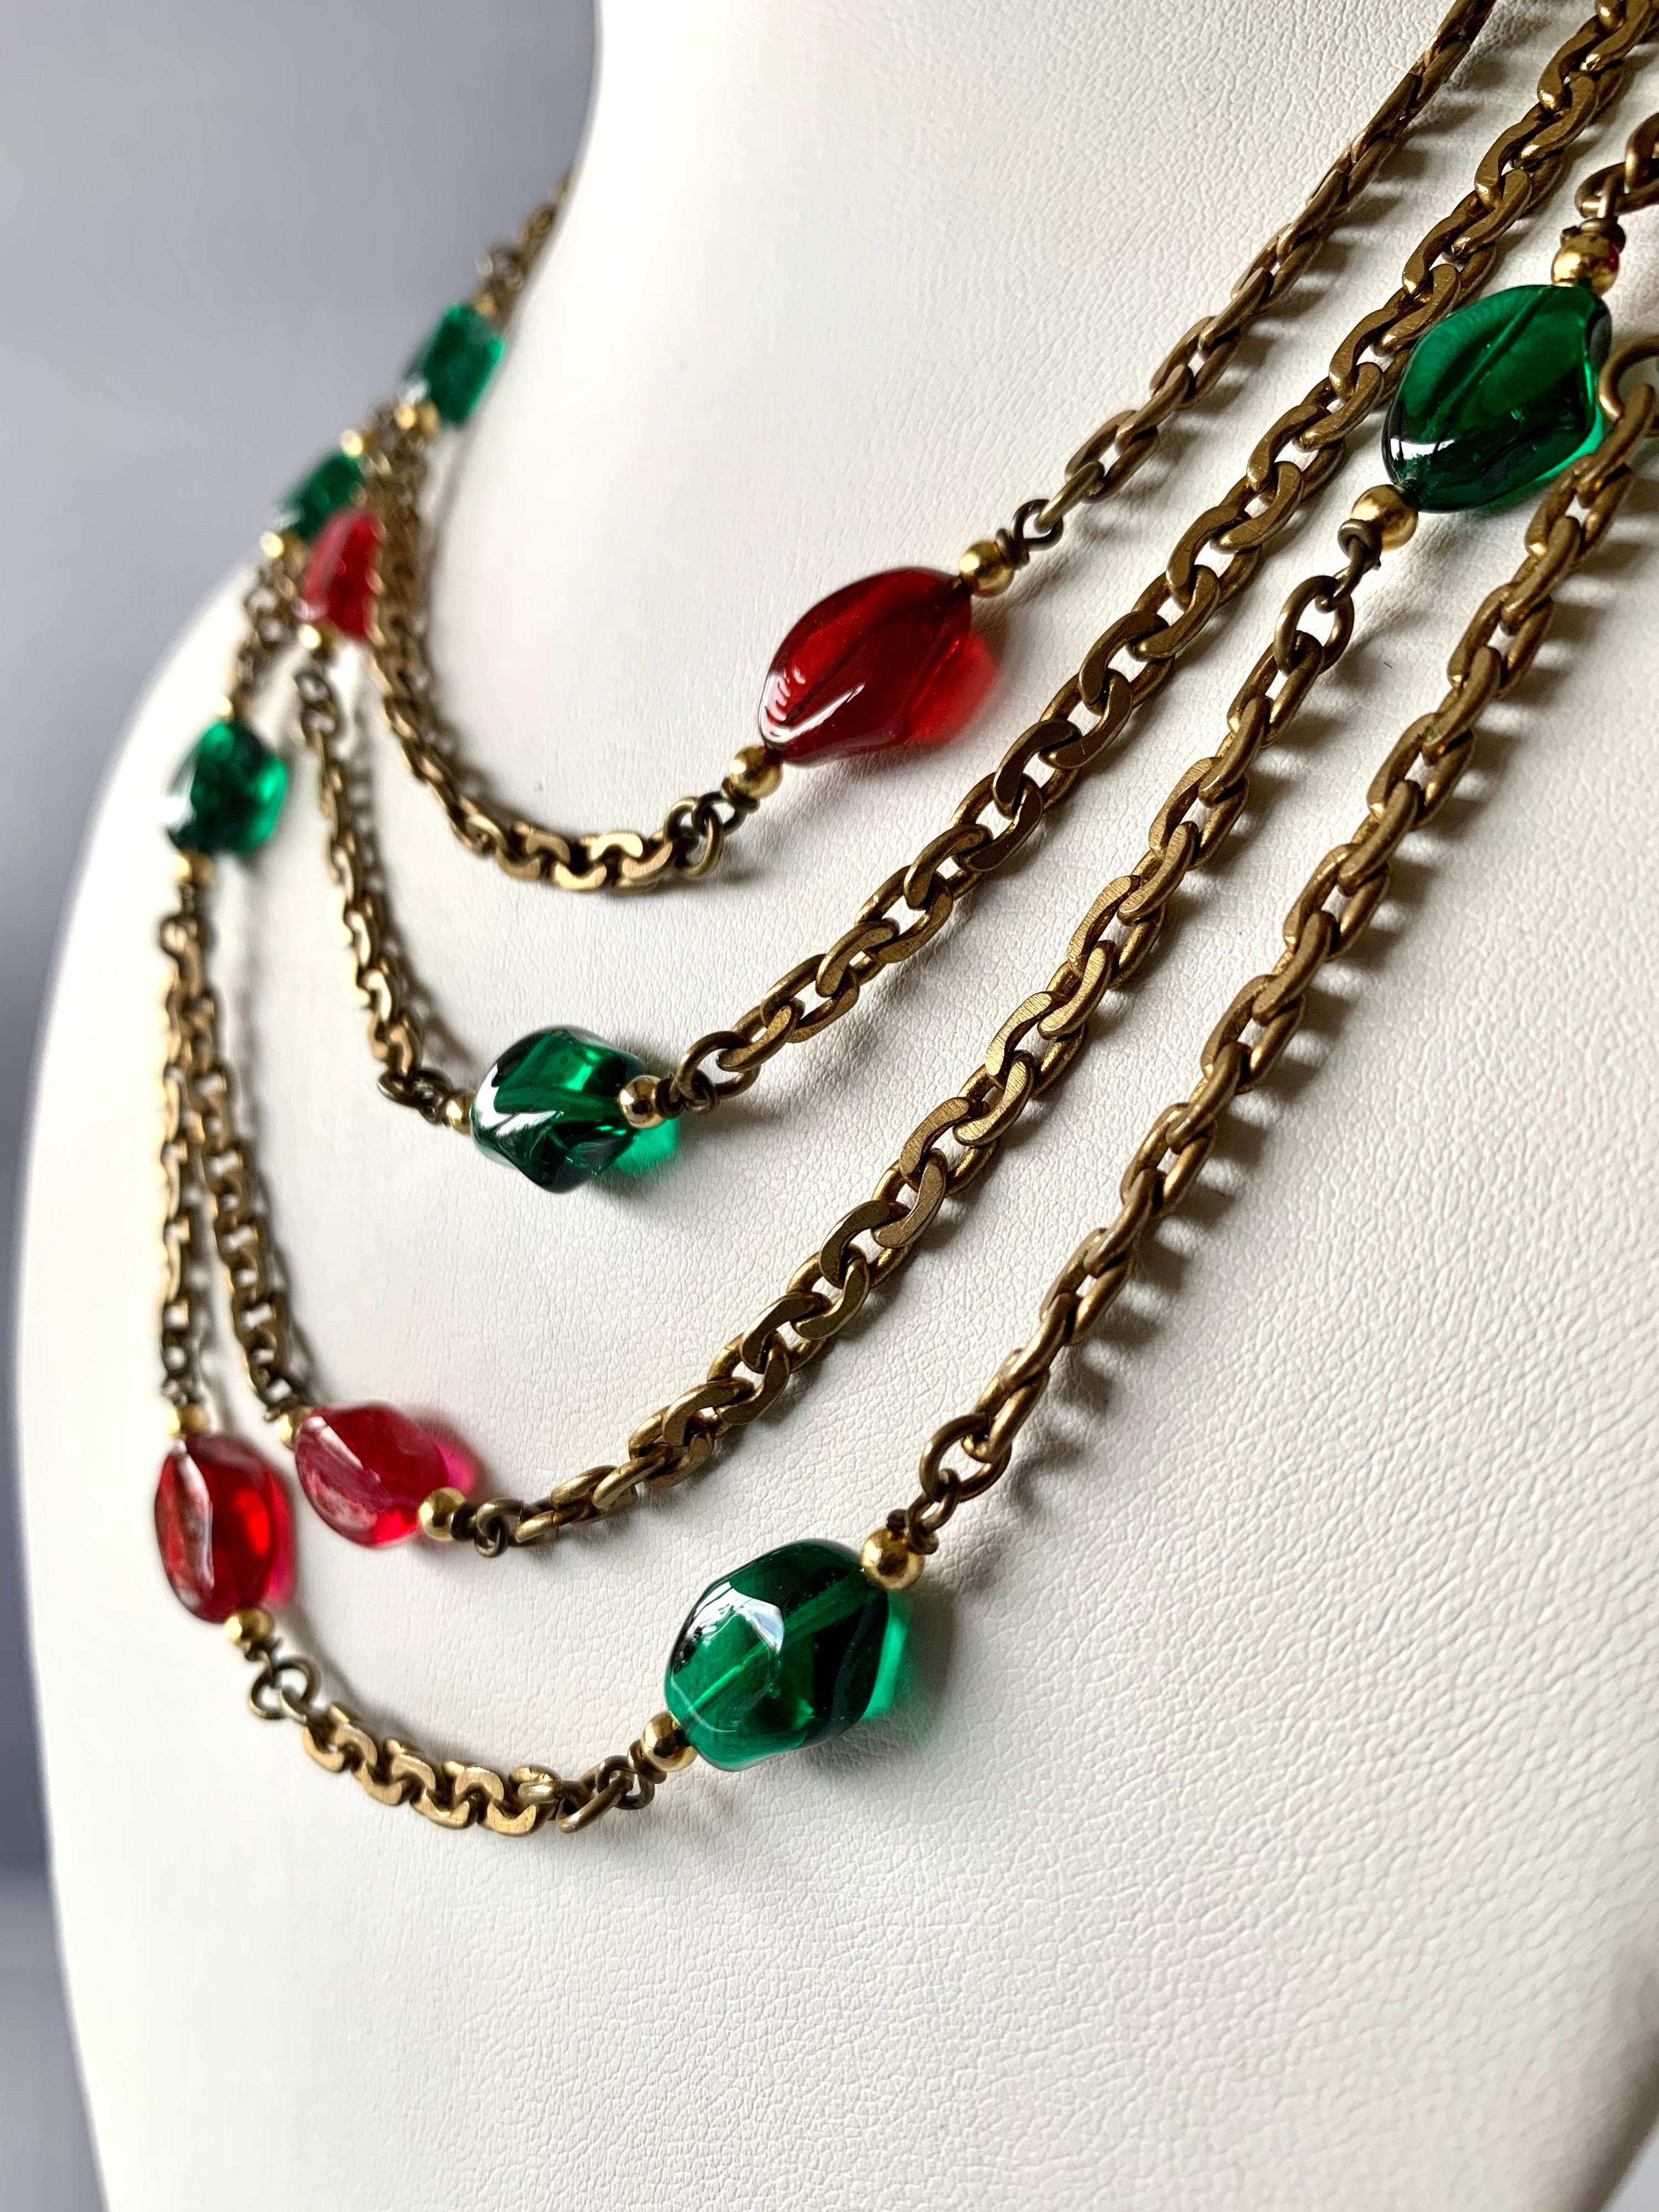  Vintage classic Byzantine style Coco Chanel gilt metal chain necklace featuring oblong molten glass beads 